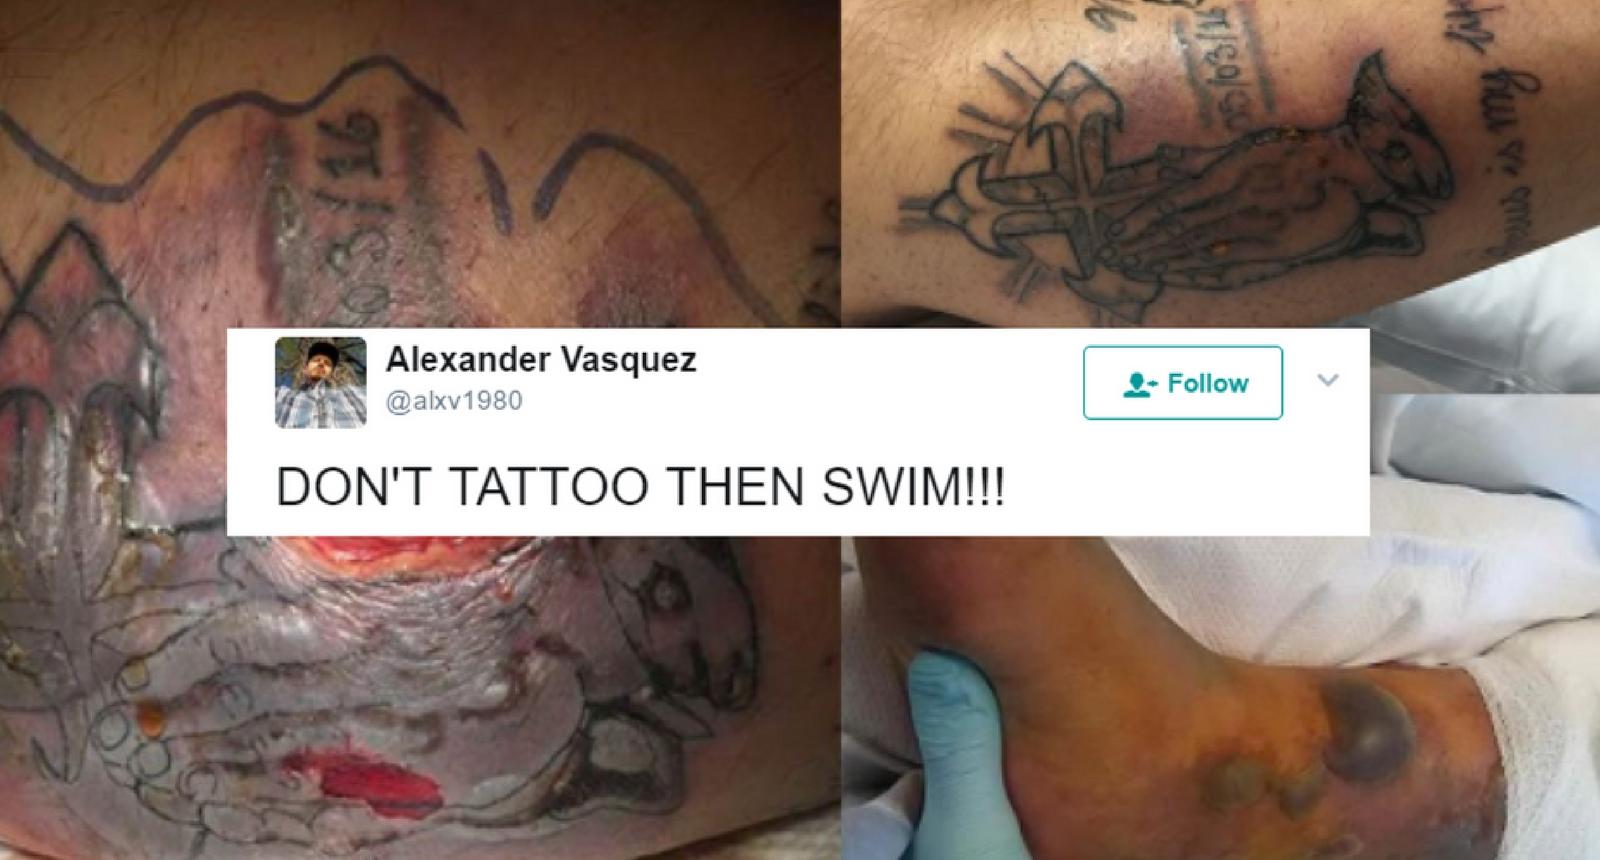 Man dies from swimming after tattoo